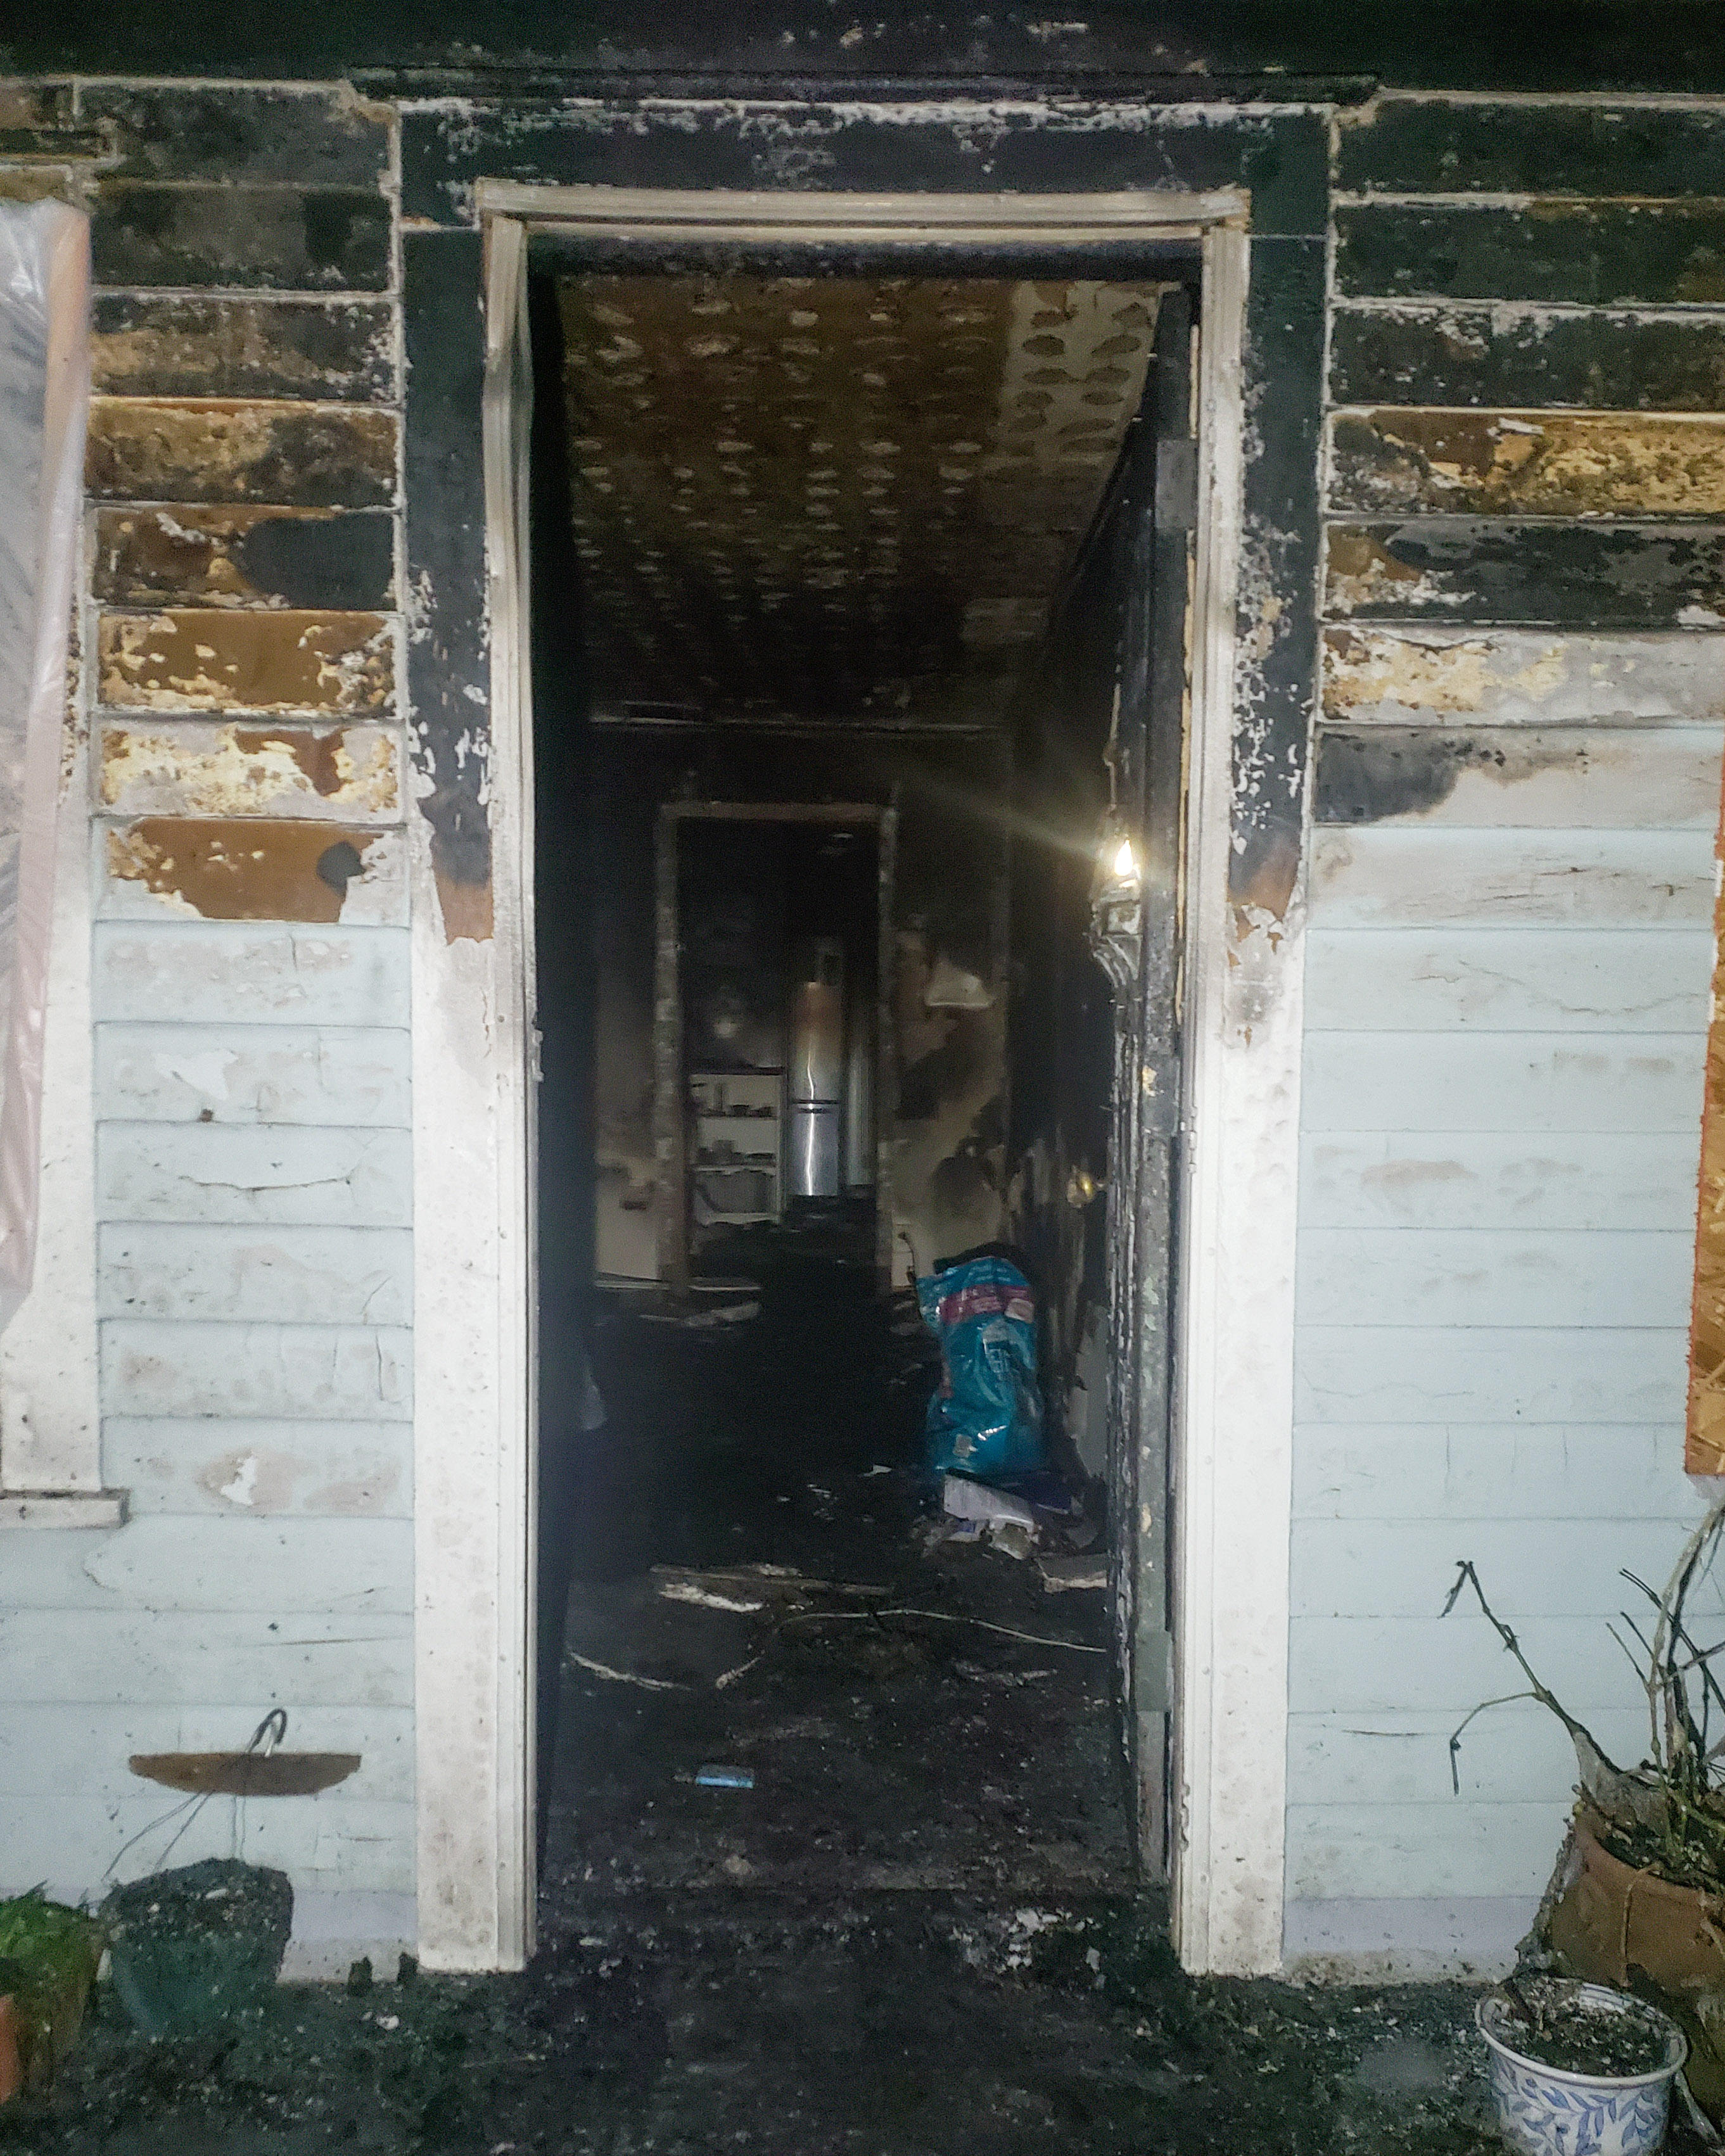 Our SERVPRO of Seattle Northwest team is here to assist you with a complete and safe fire damage restoration process after an unforeseen fire in your Broadview, WA home or business. Give us a call!